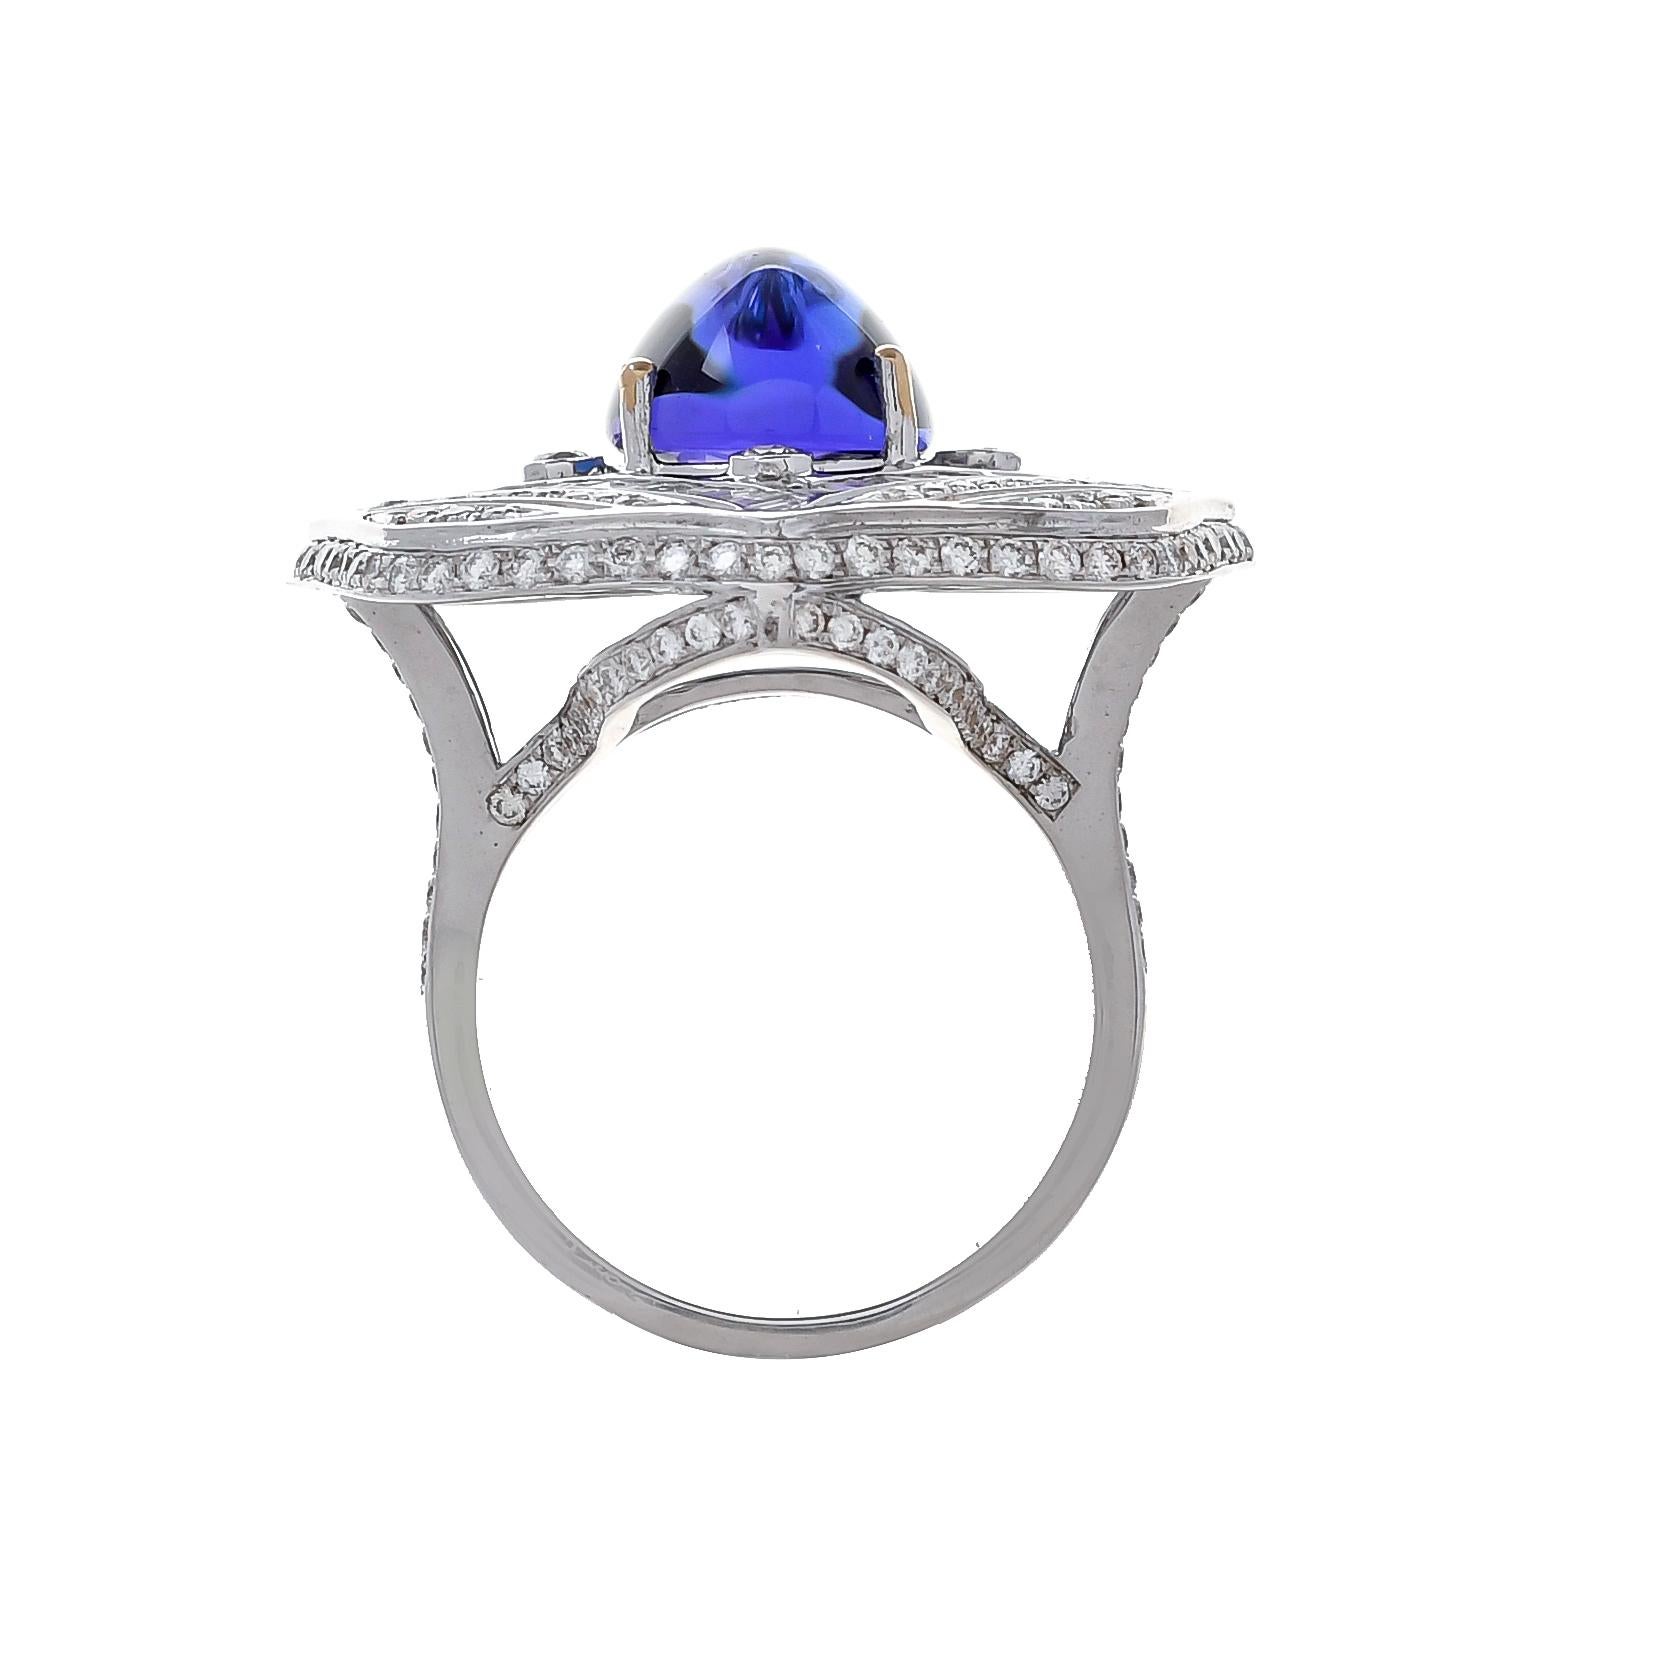 The cabochon tanzanite weighing approximately 6.20 carats set within a frame of baguette diamonds further accented with sparkling round diamonds with a total diamond weight of 2.30 carats, completed by bifurcated shoulders studded with diamonds.